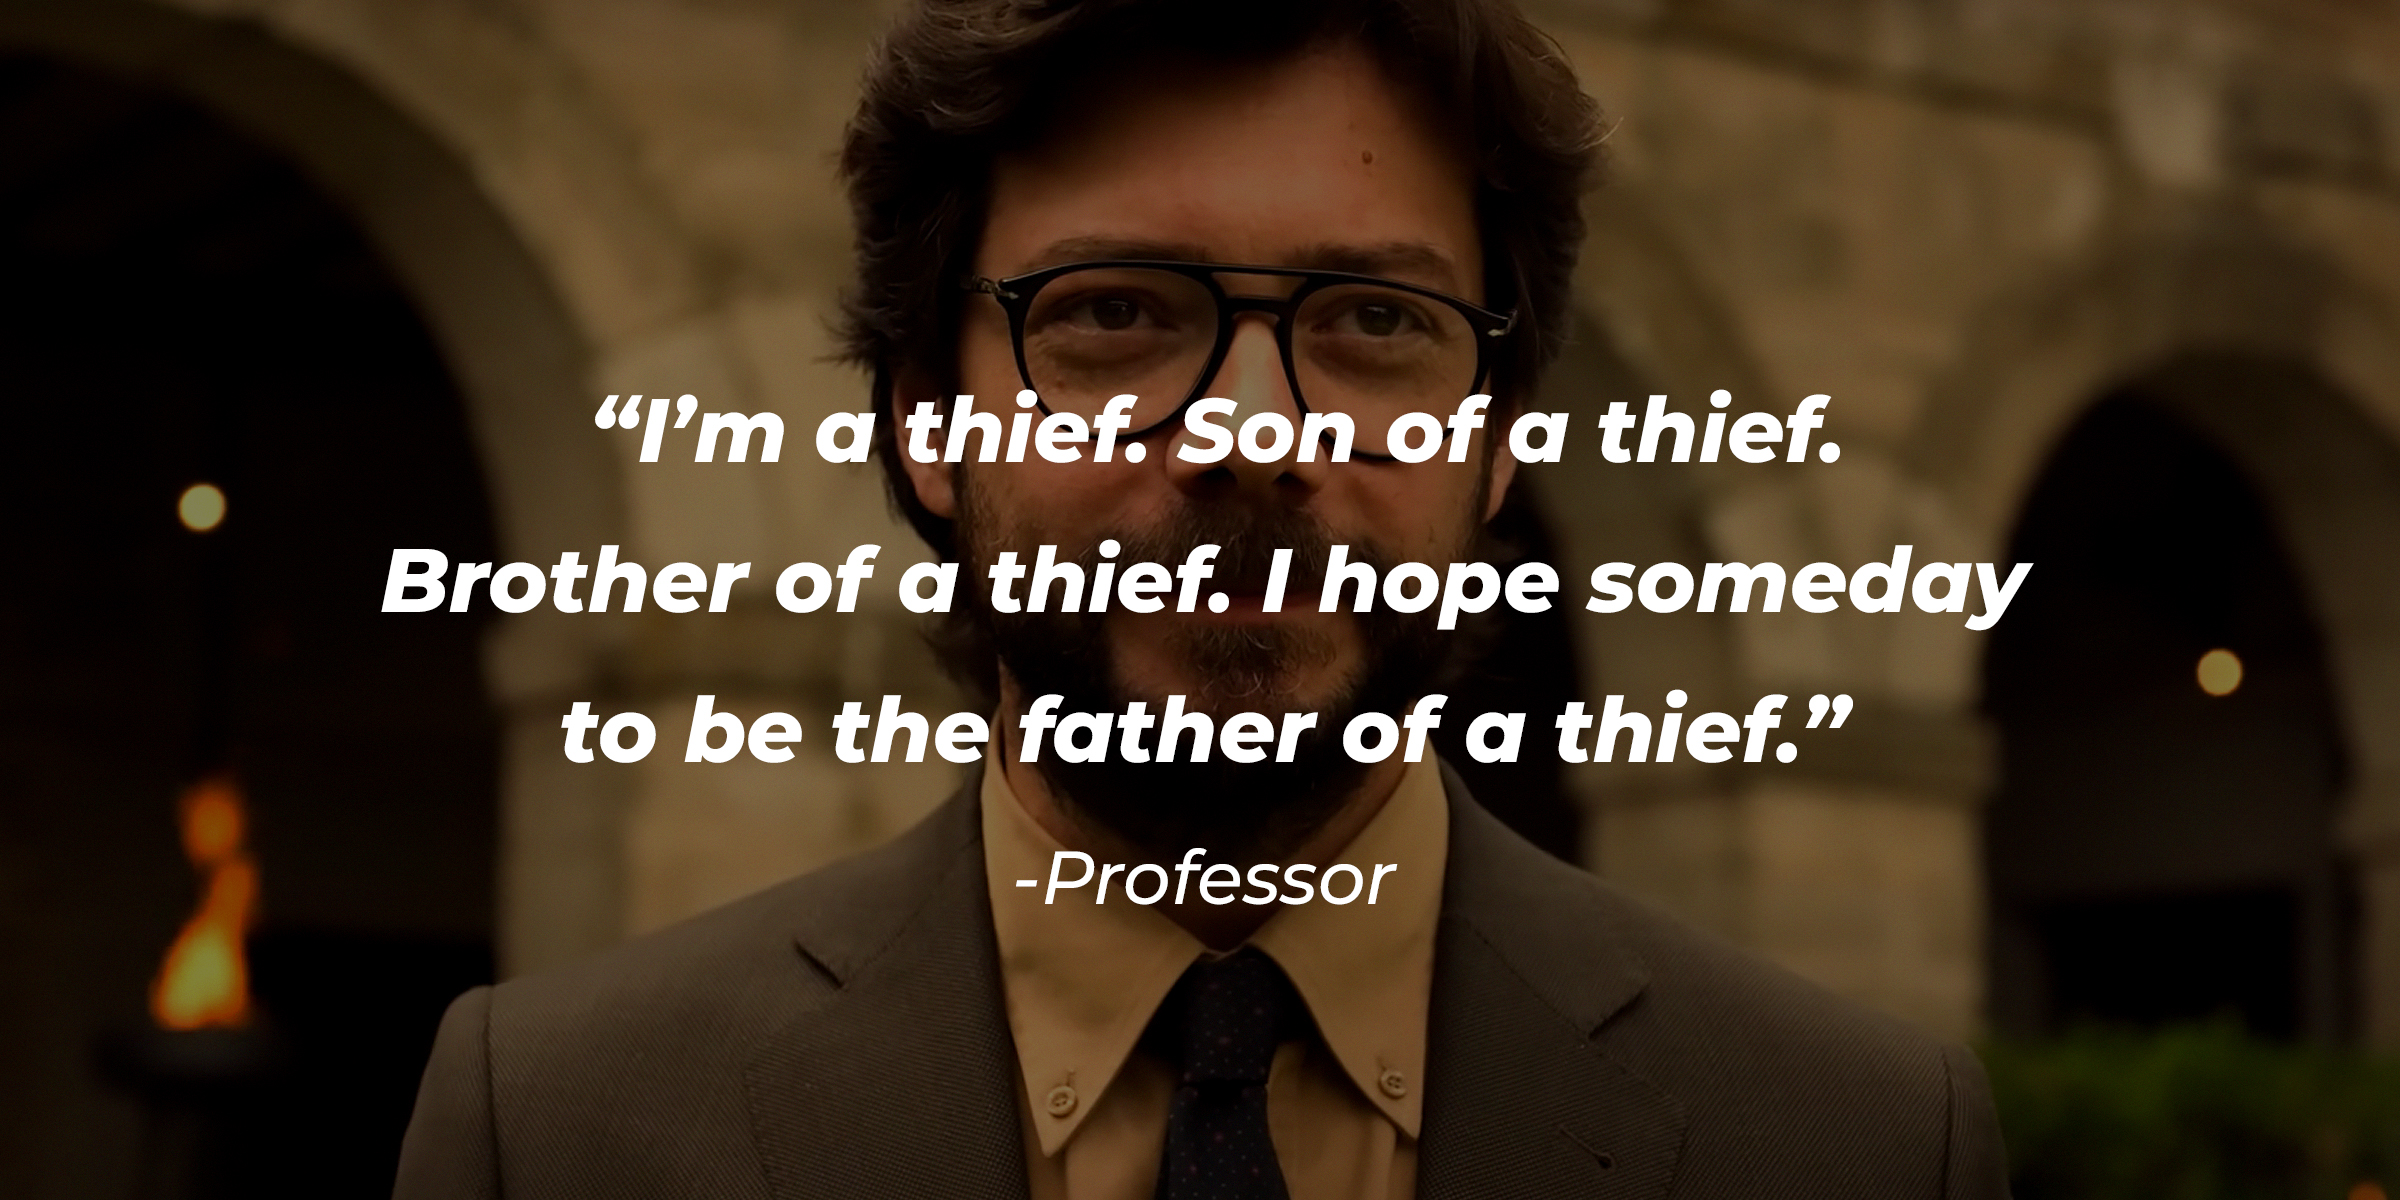 An image of Professor, with his quote: “I’m a thief. Son of a thief. Brother of a thief. I hope someday to be the father of a thief.” | Source: Youtube.com/Netflix